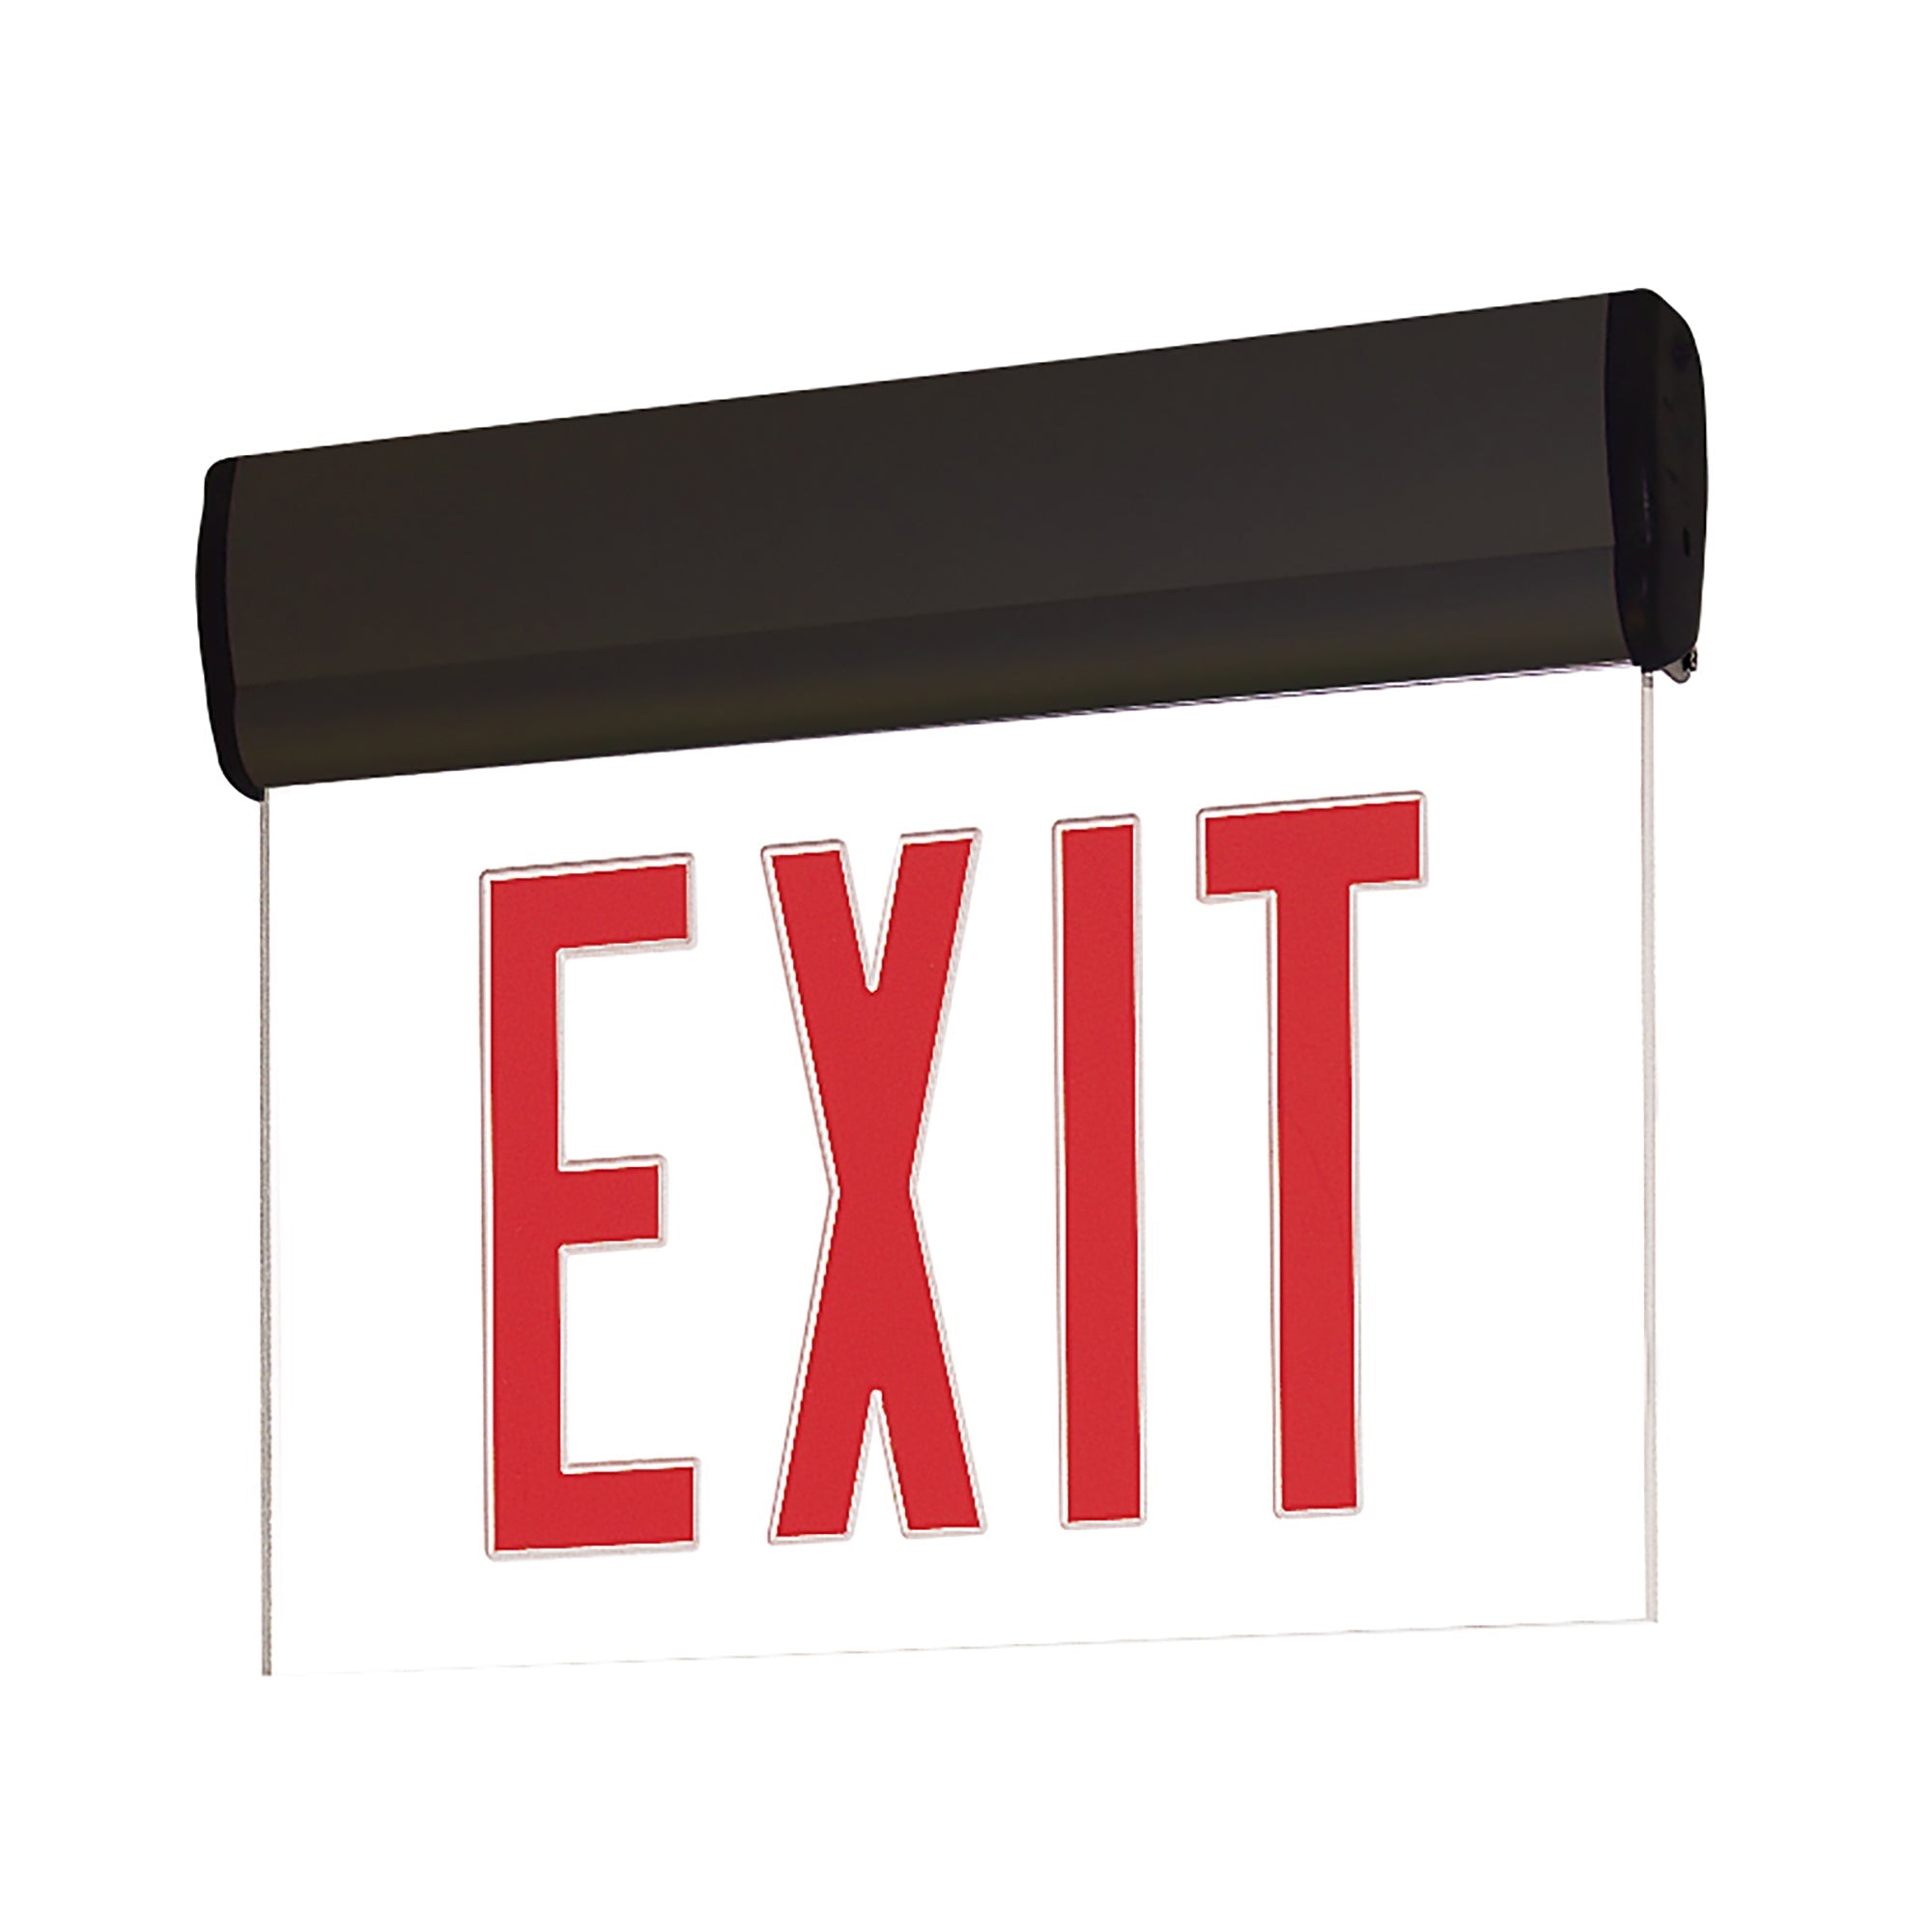 Nora Lighting NX-811-LEDRCB - Exit / Emergency - Surface Adjustable LED Edge-Lit Exit Sign, 2 Circuit, 6 Inch Red Letters, Single Face / Clear Acrylic, Black Housing